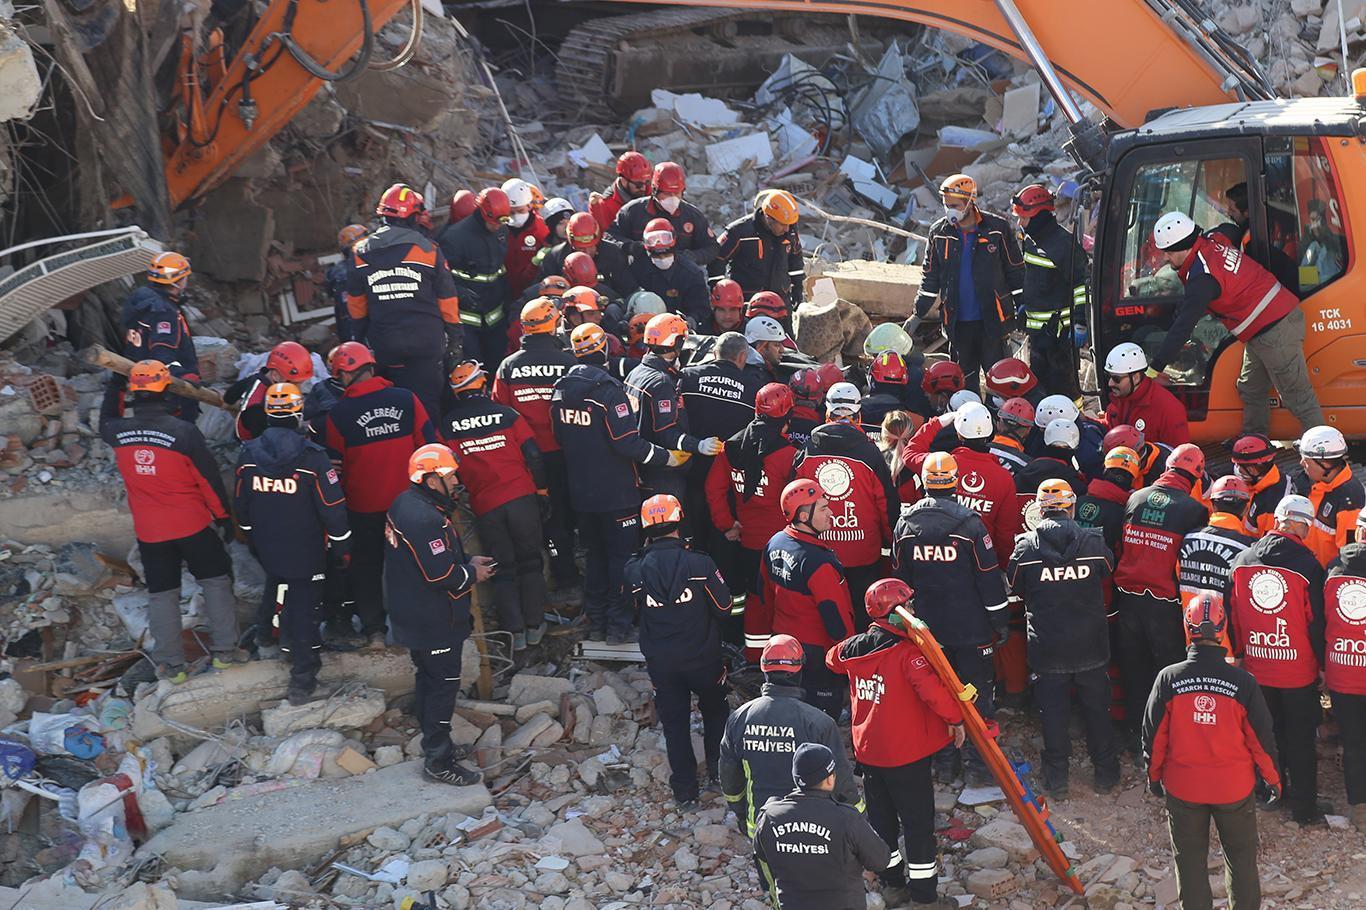 The last body trapped under the rubble recovered in Turkey's earthquake